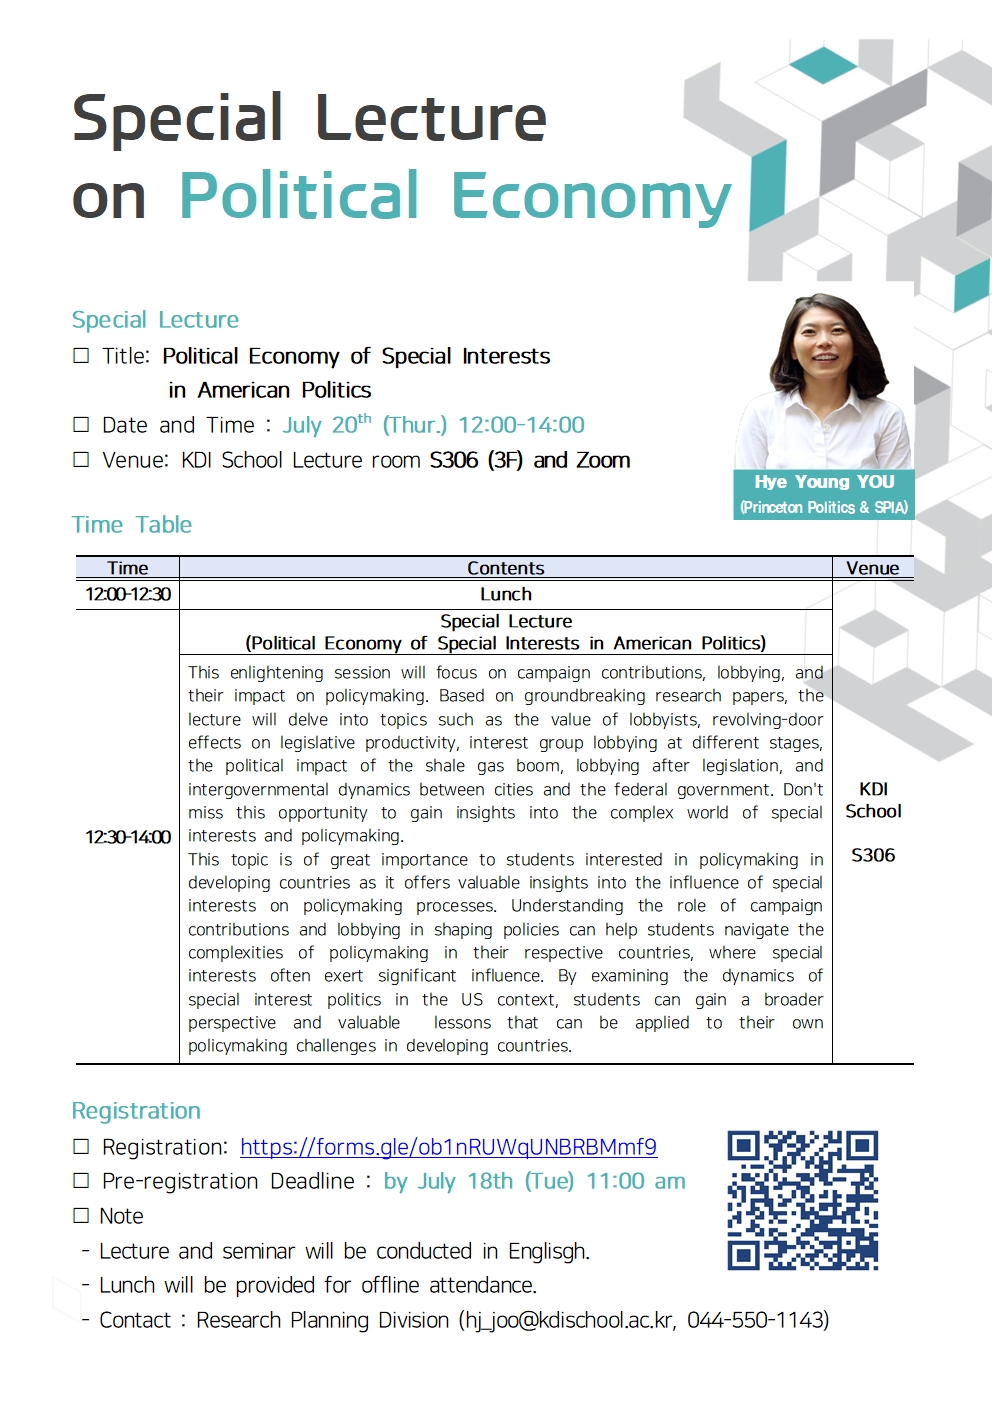 [Invitation] Special Lecture on Political Economy(July 20th (Thur.) 12:00-14:00)